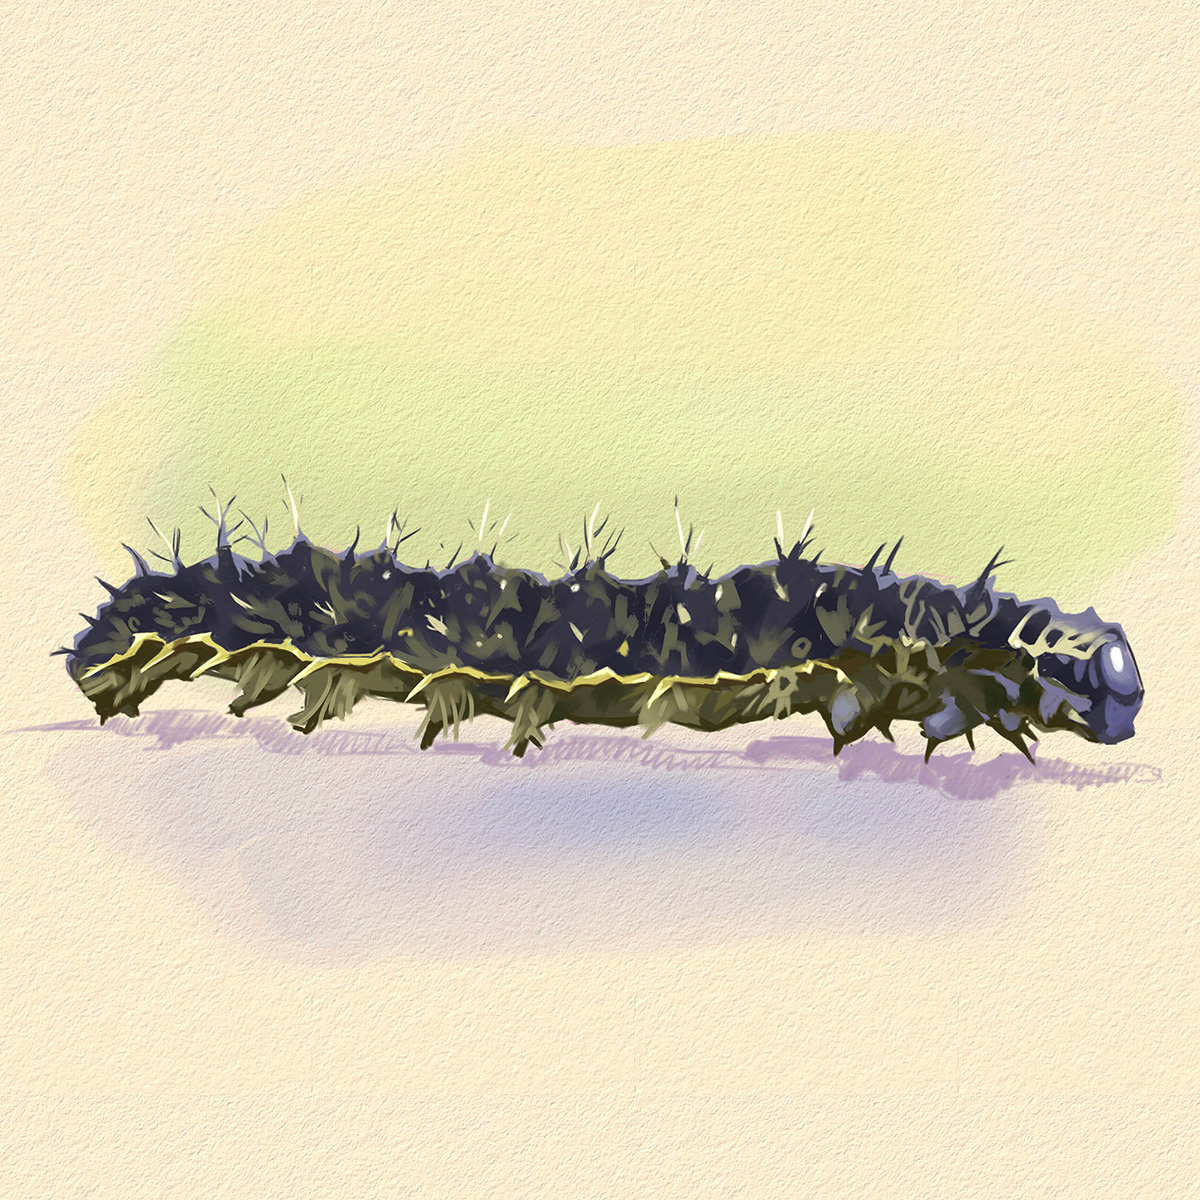 painted lady butterfly caterpillar